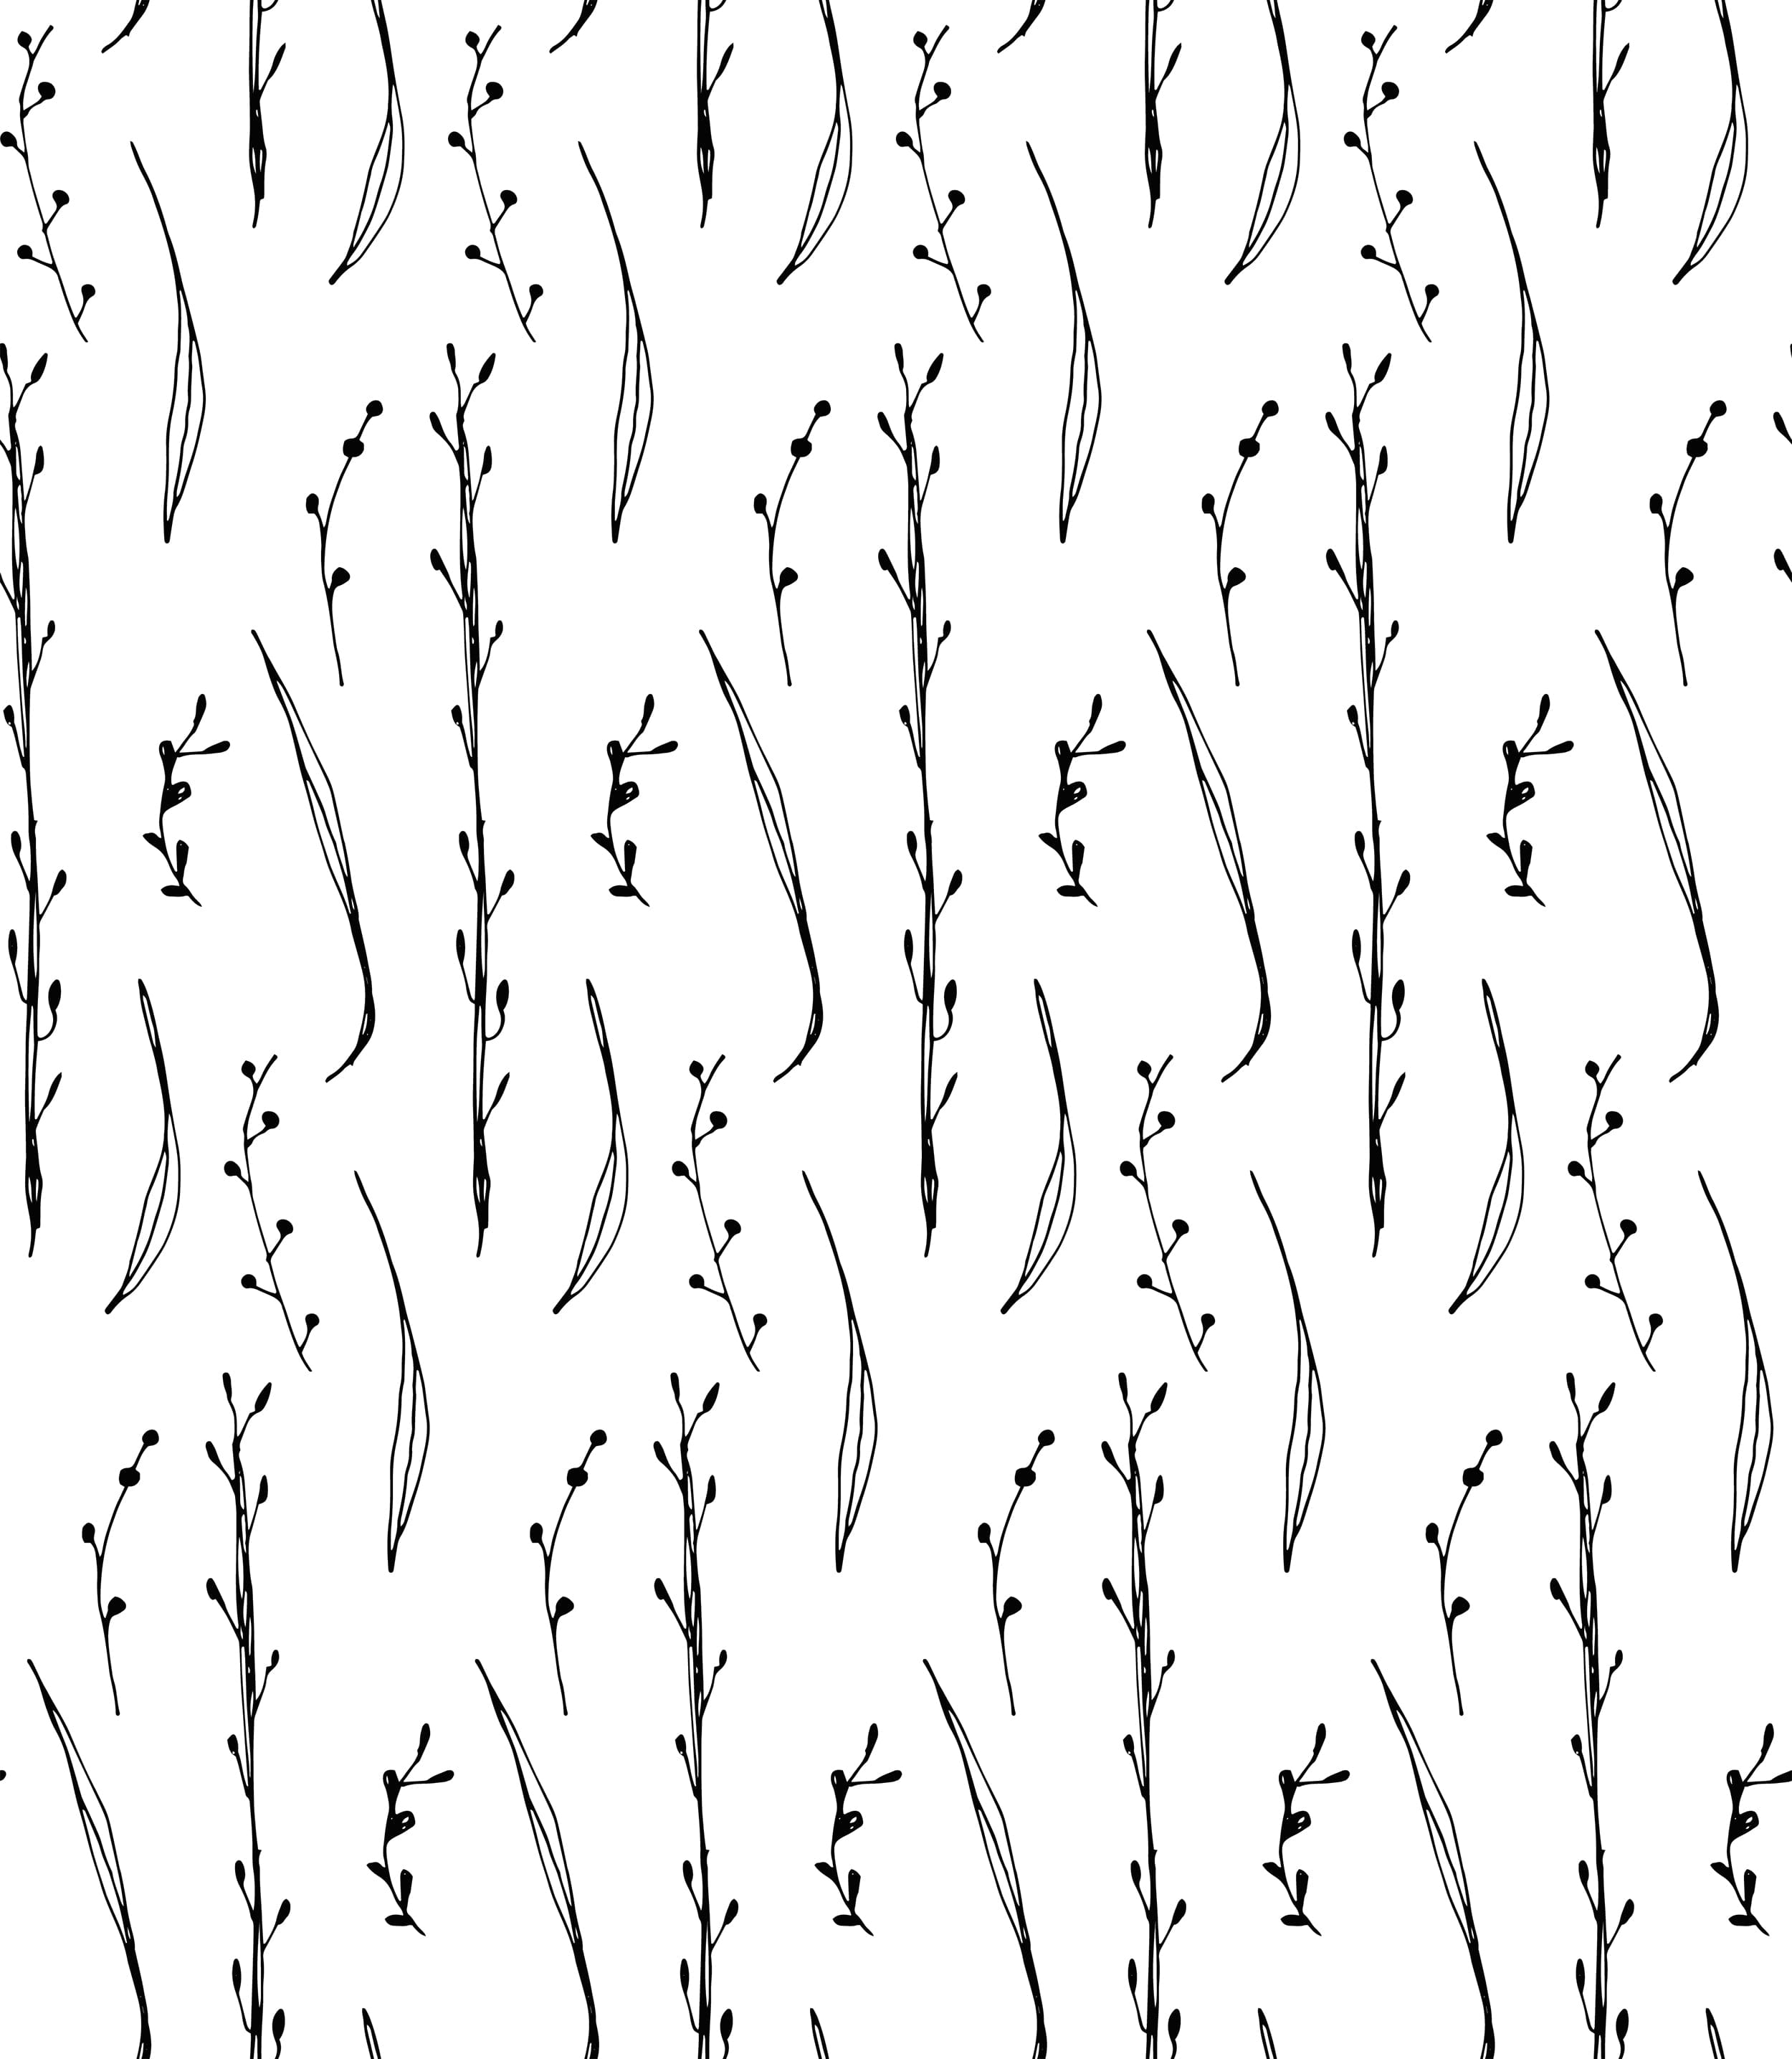 A seamless pattern of Twig & Leaf Wallpaper showcasing a black and white design of twigs and leaves, creating a simple yet elegant look.